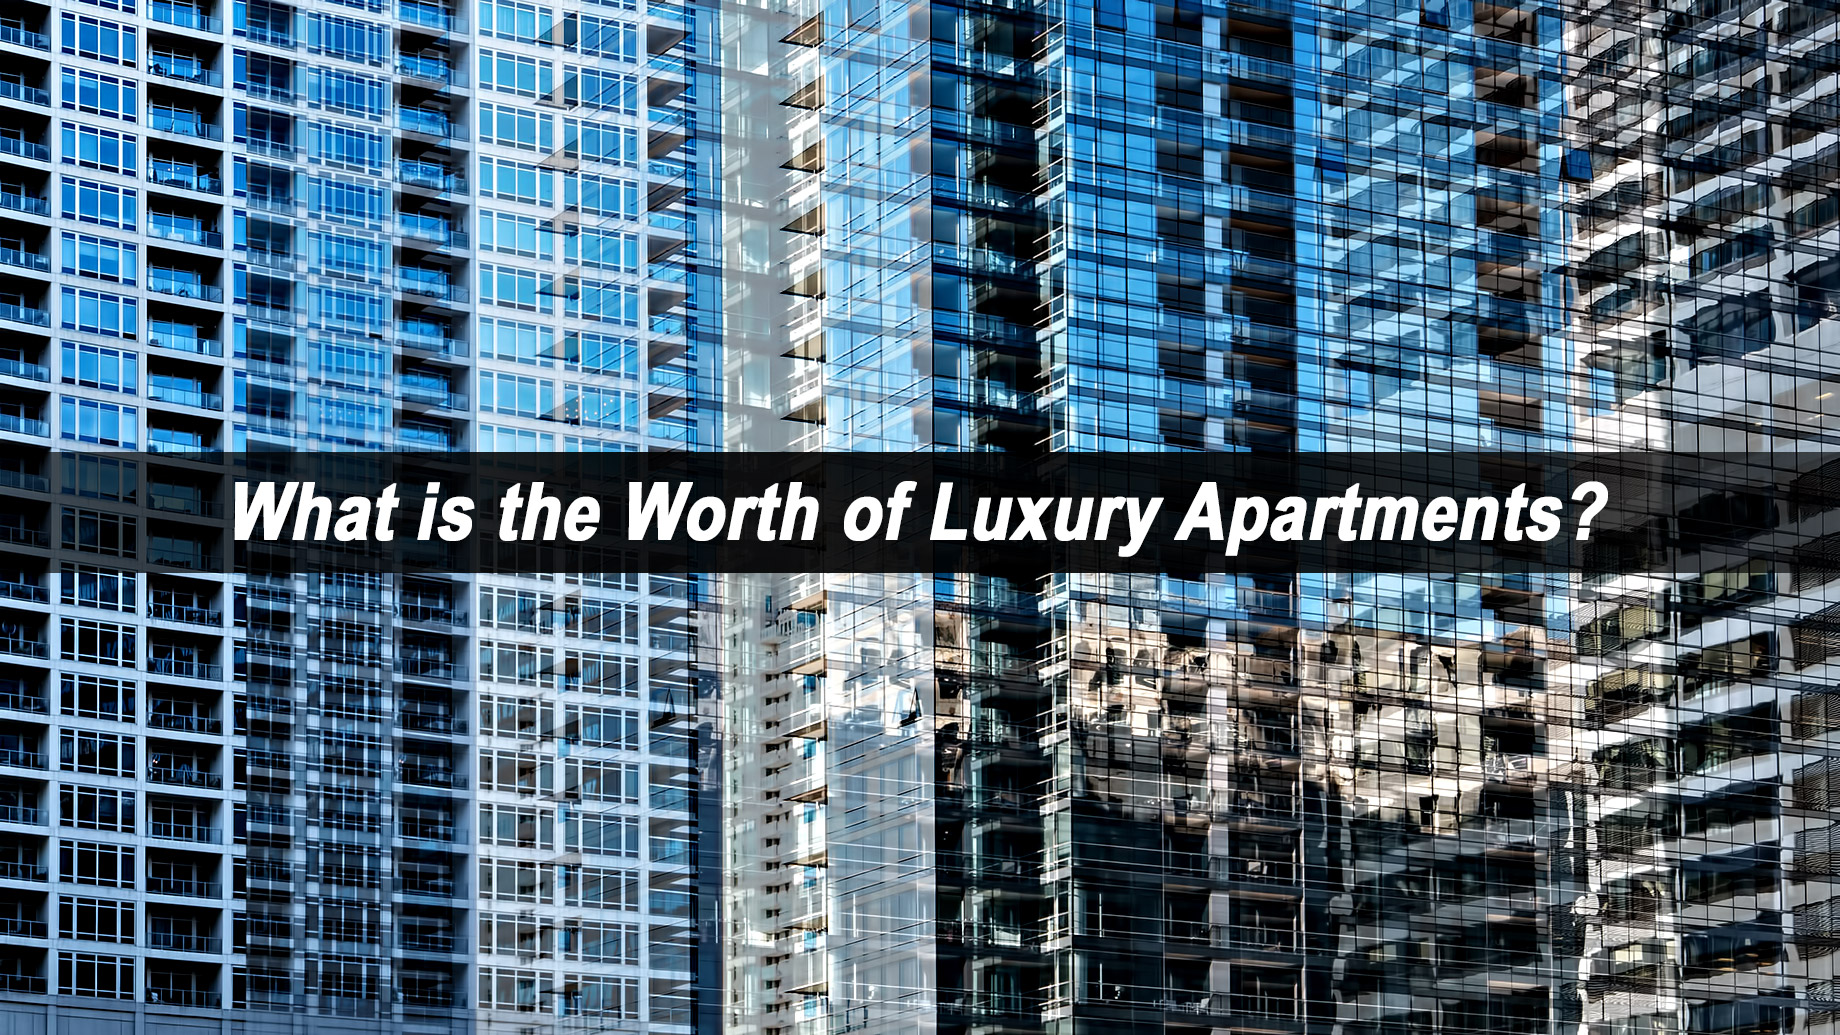 What is the Worth of Luxury Apartments?